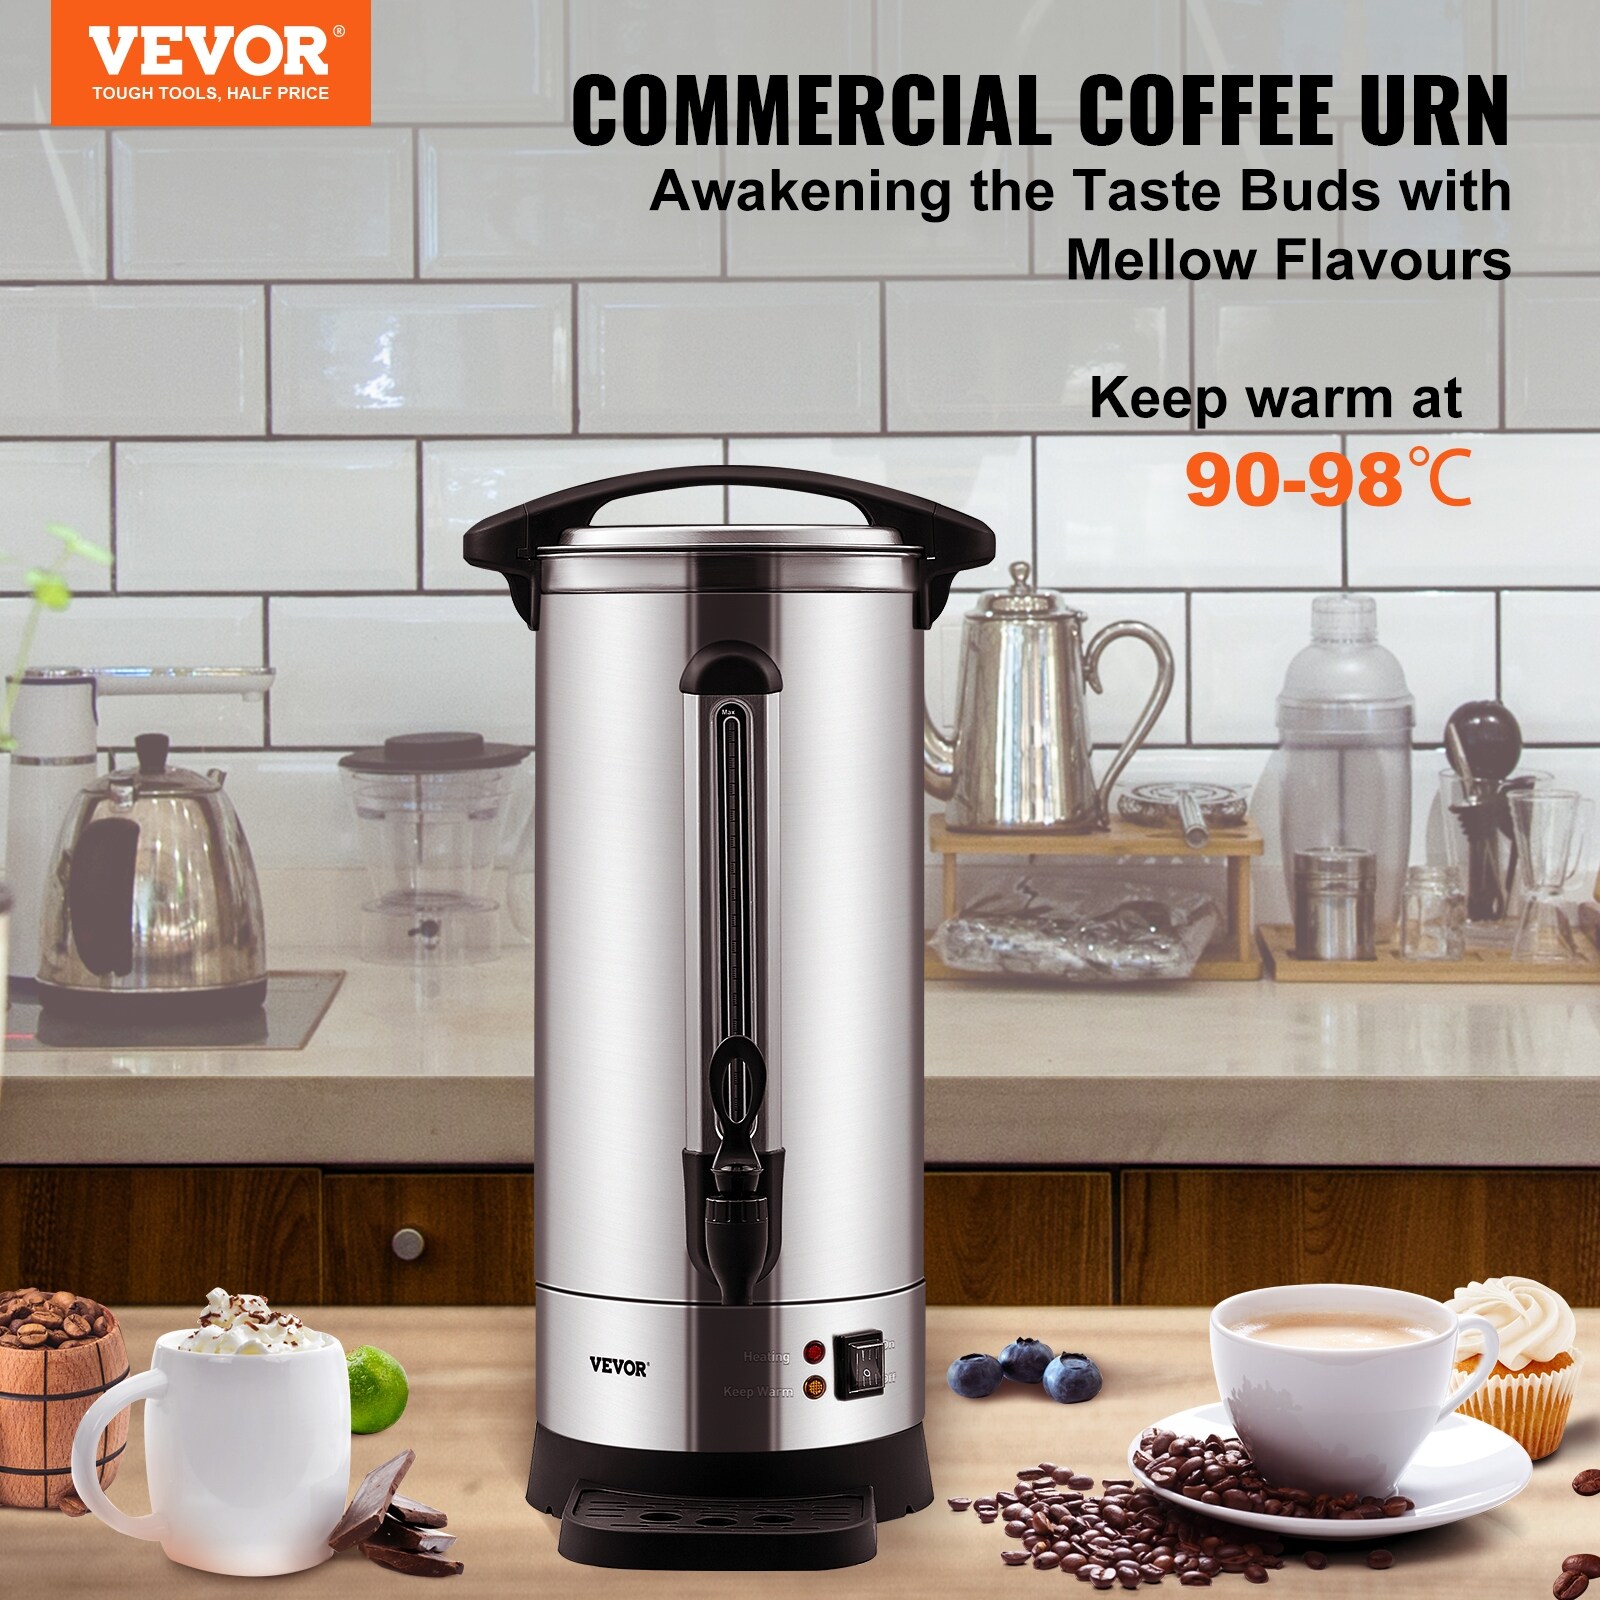 https://ak1.ostkcdn.com/images/products/is/images/direct/59bd69c31107d3716242b06e1c157ab44975ca6a/VEVOR-Commercial-Coffee-Urn-65-110-Cup-Stainless-Steel-Coffee-Dispenser-Fast-Brew.jpg